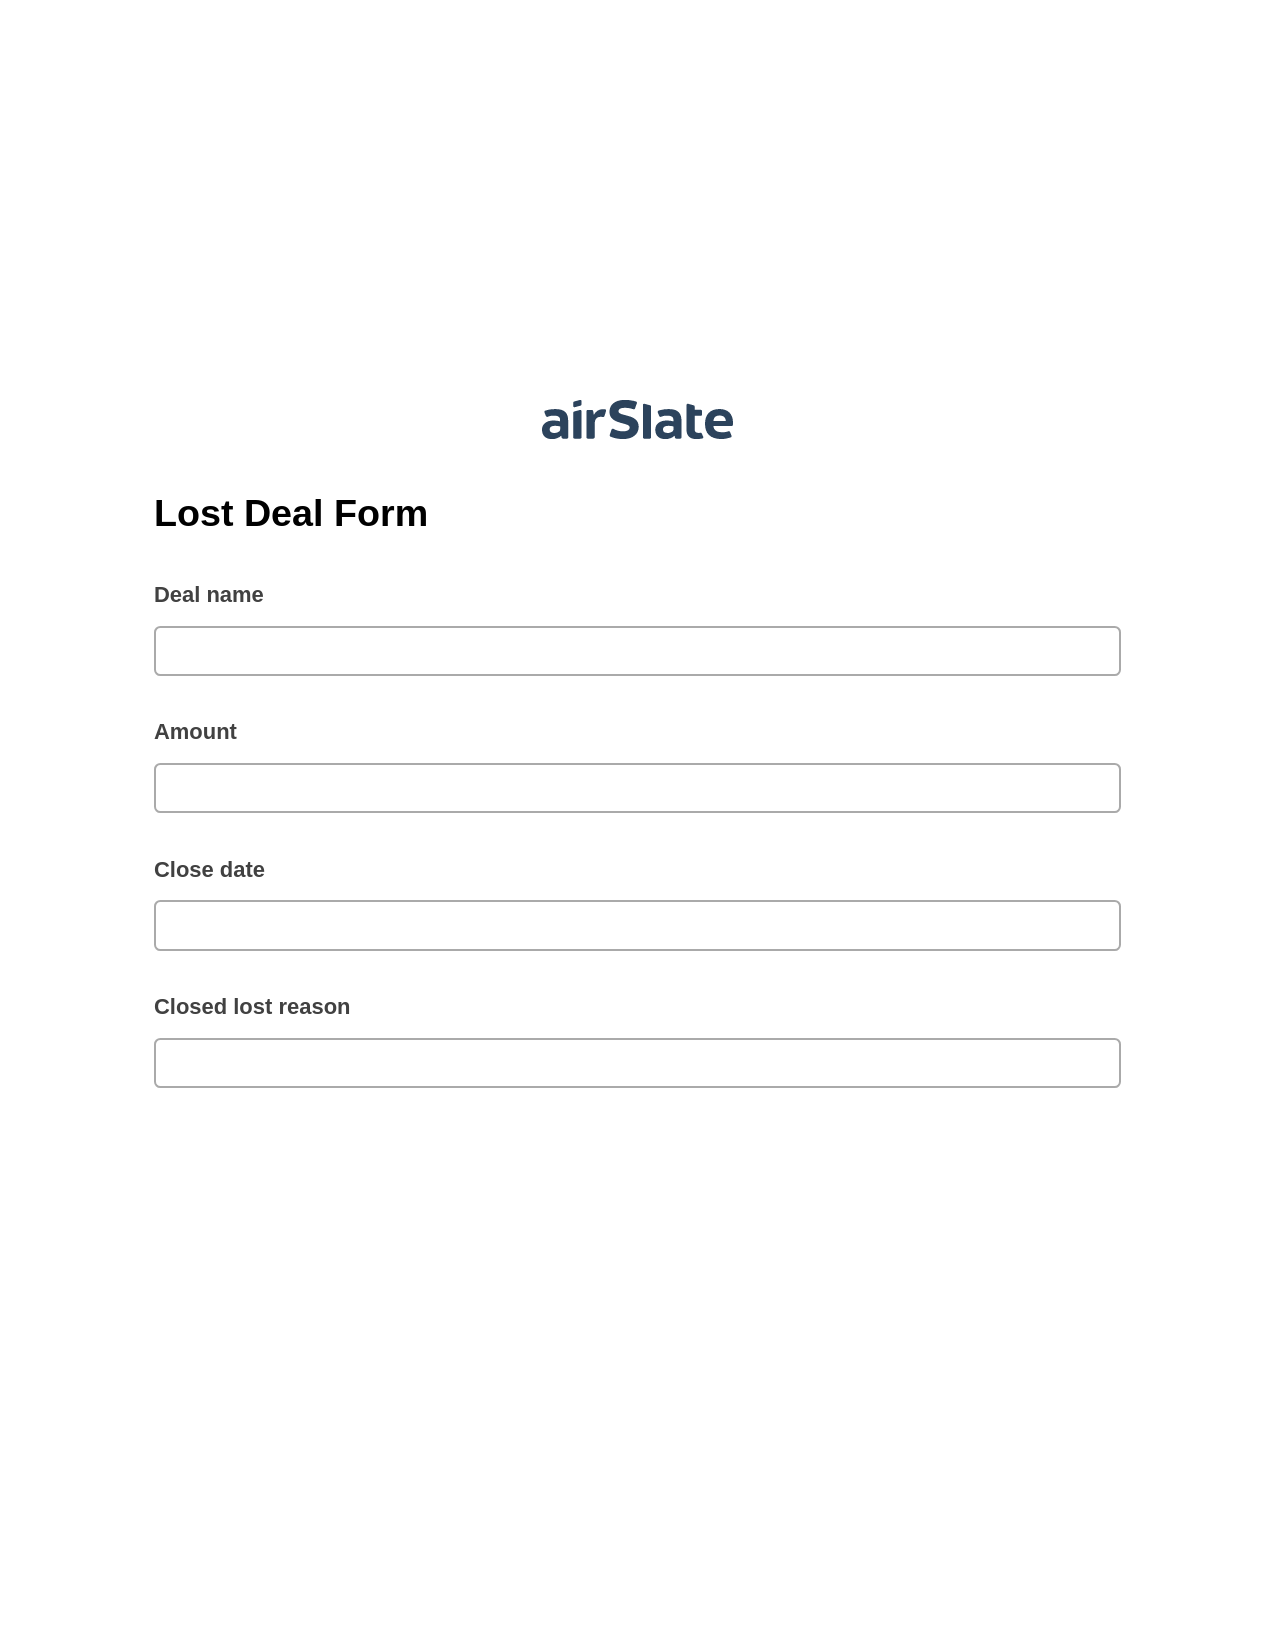 Lost Deal Form Prefill from NetSuite records, Update NetSuite Record Bot, Email Notification Postfinish Bot